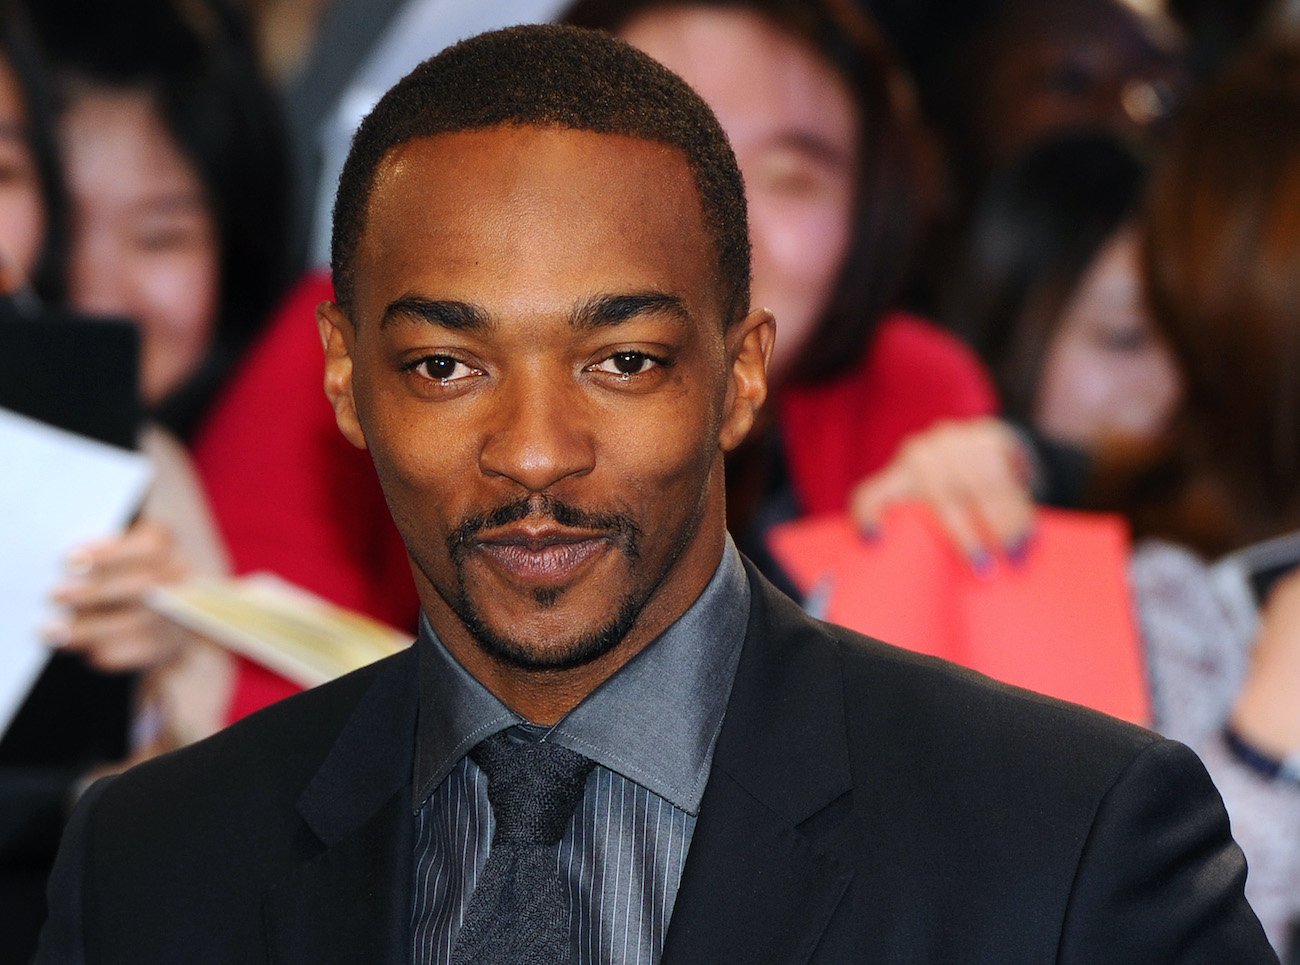 What’s Next for Anthony Mackie Following ‘The Falcon and the Winter Soldier?’